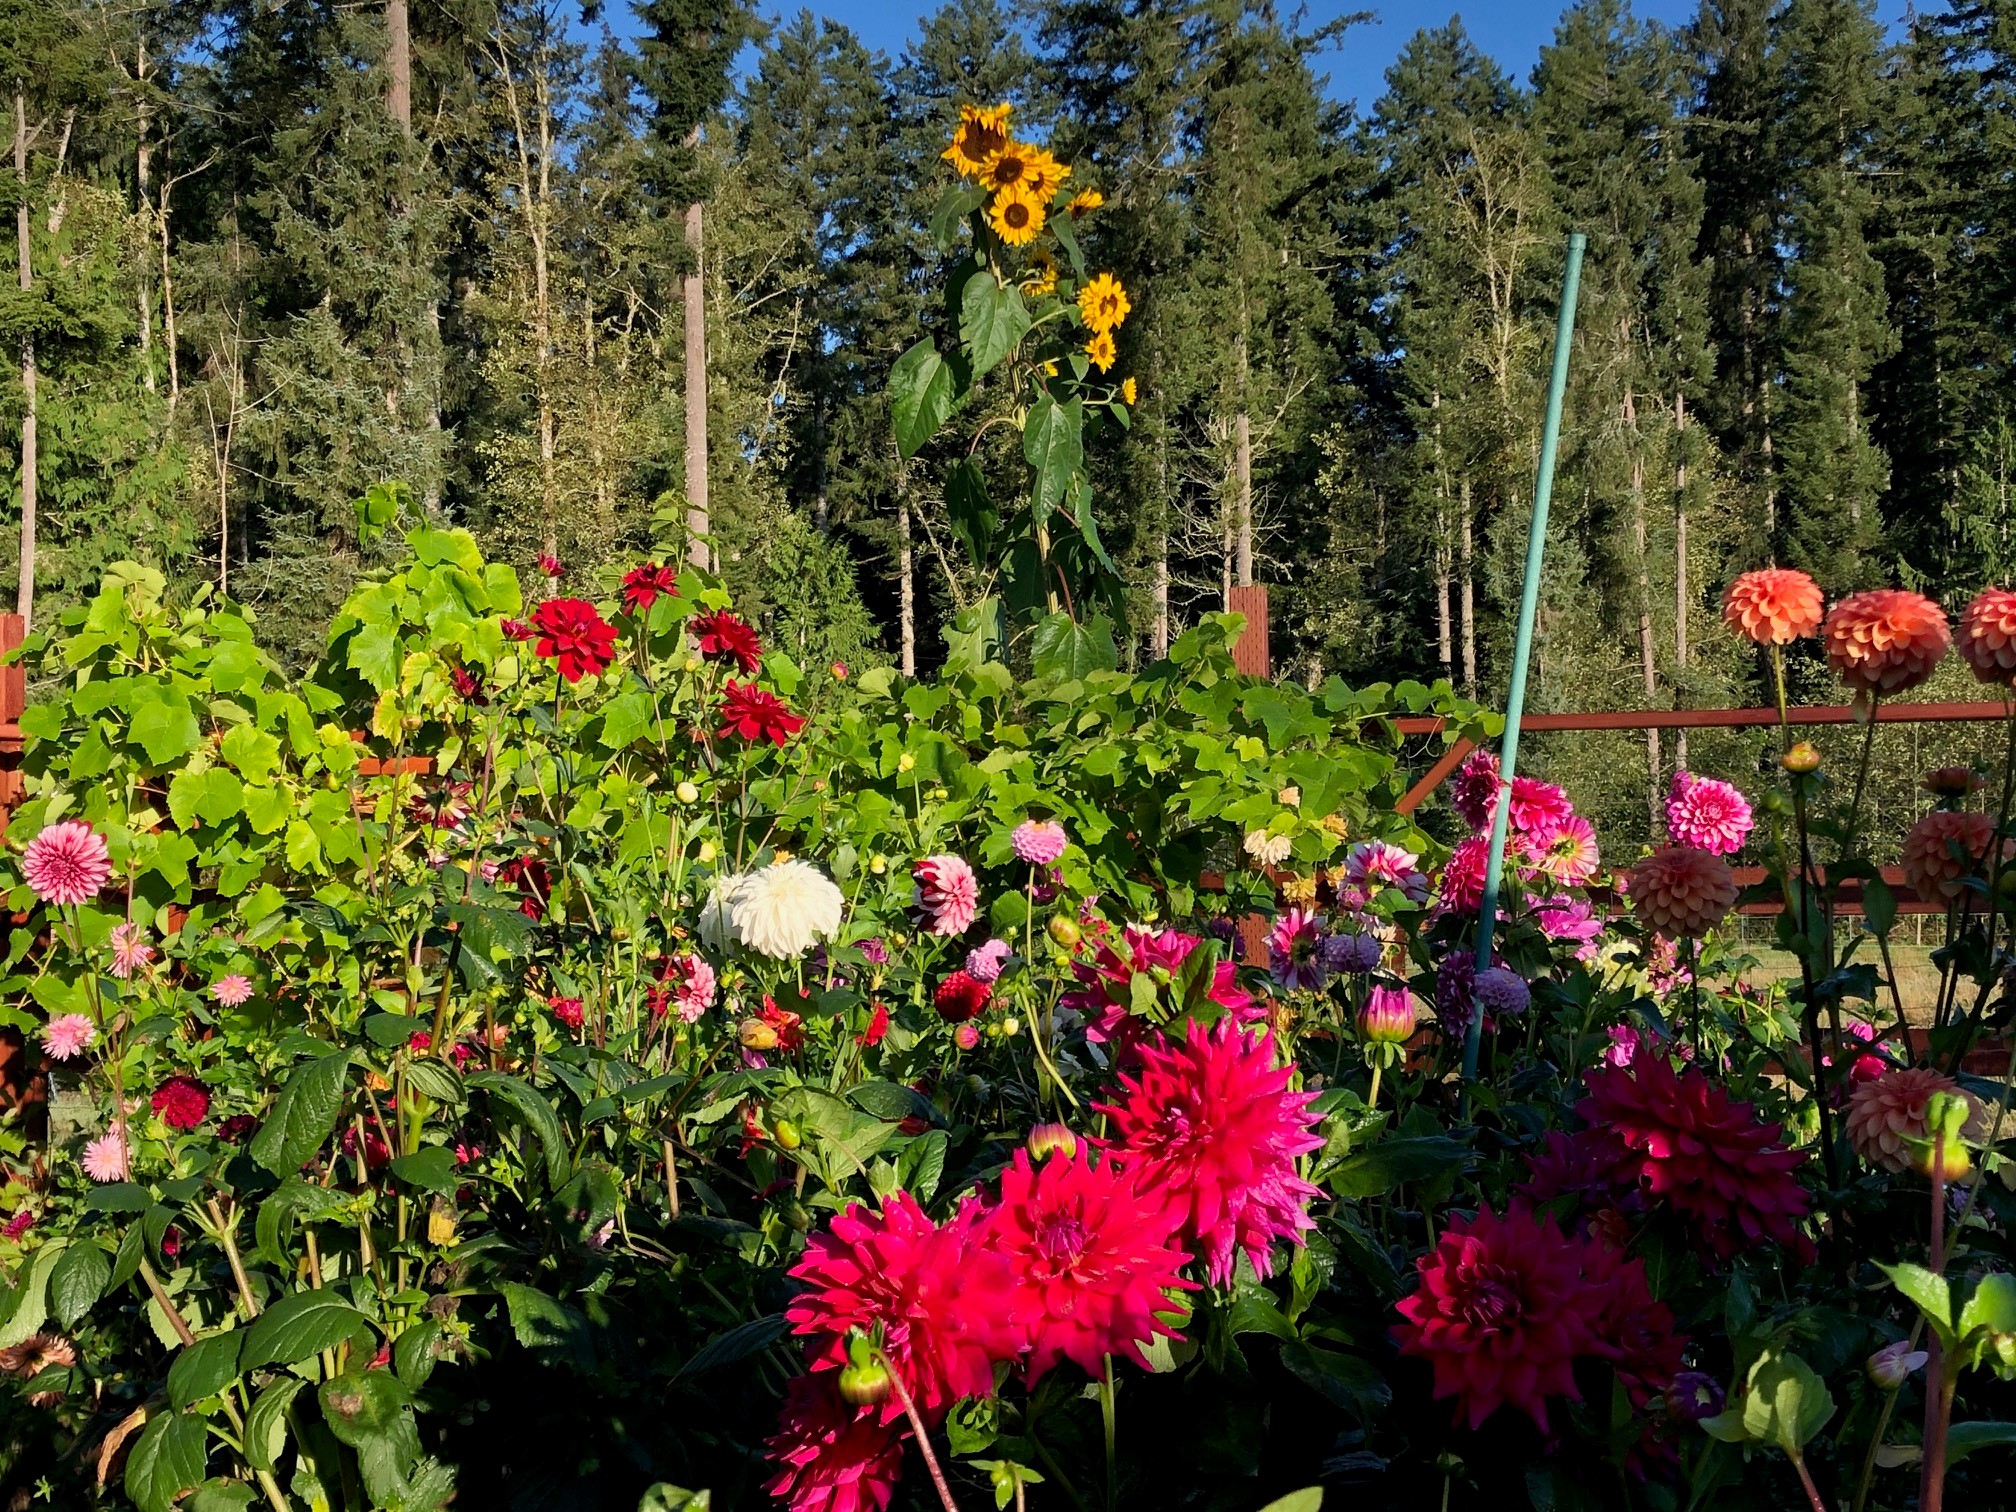 Dahlia patch in 2021 with Chloe Janae beaming from the foreground and a tall sunflower in the background against a forest backdrop.